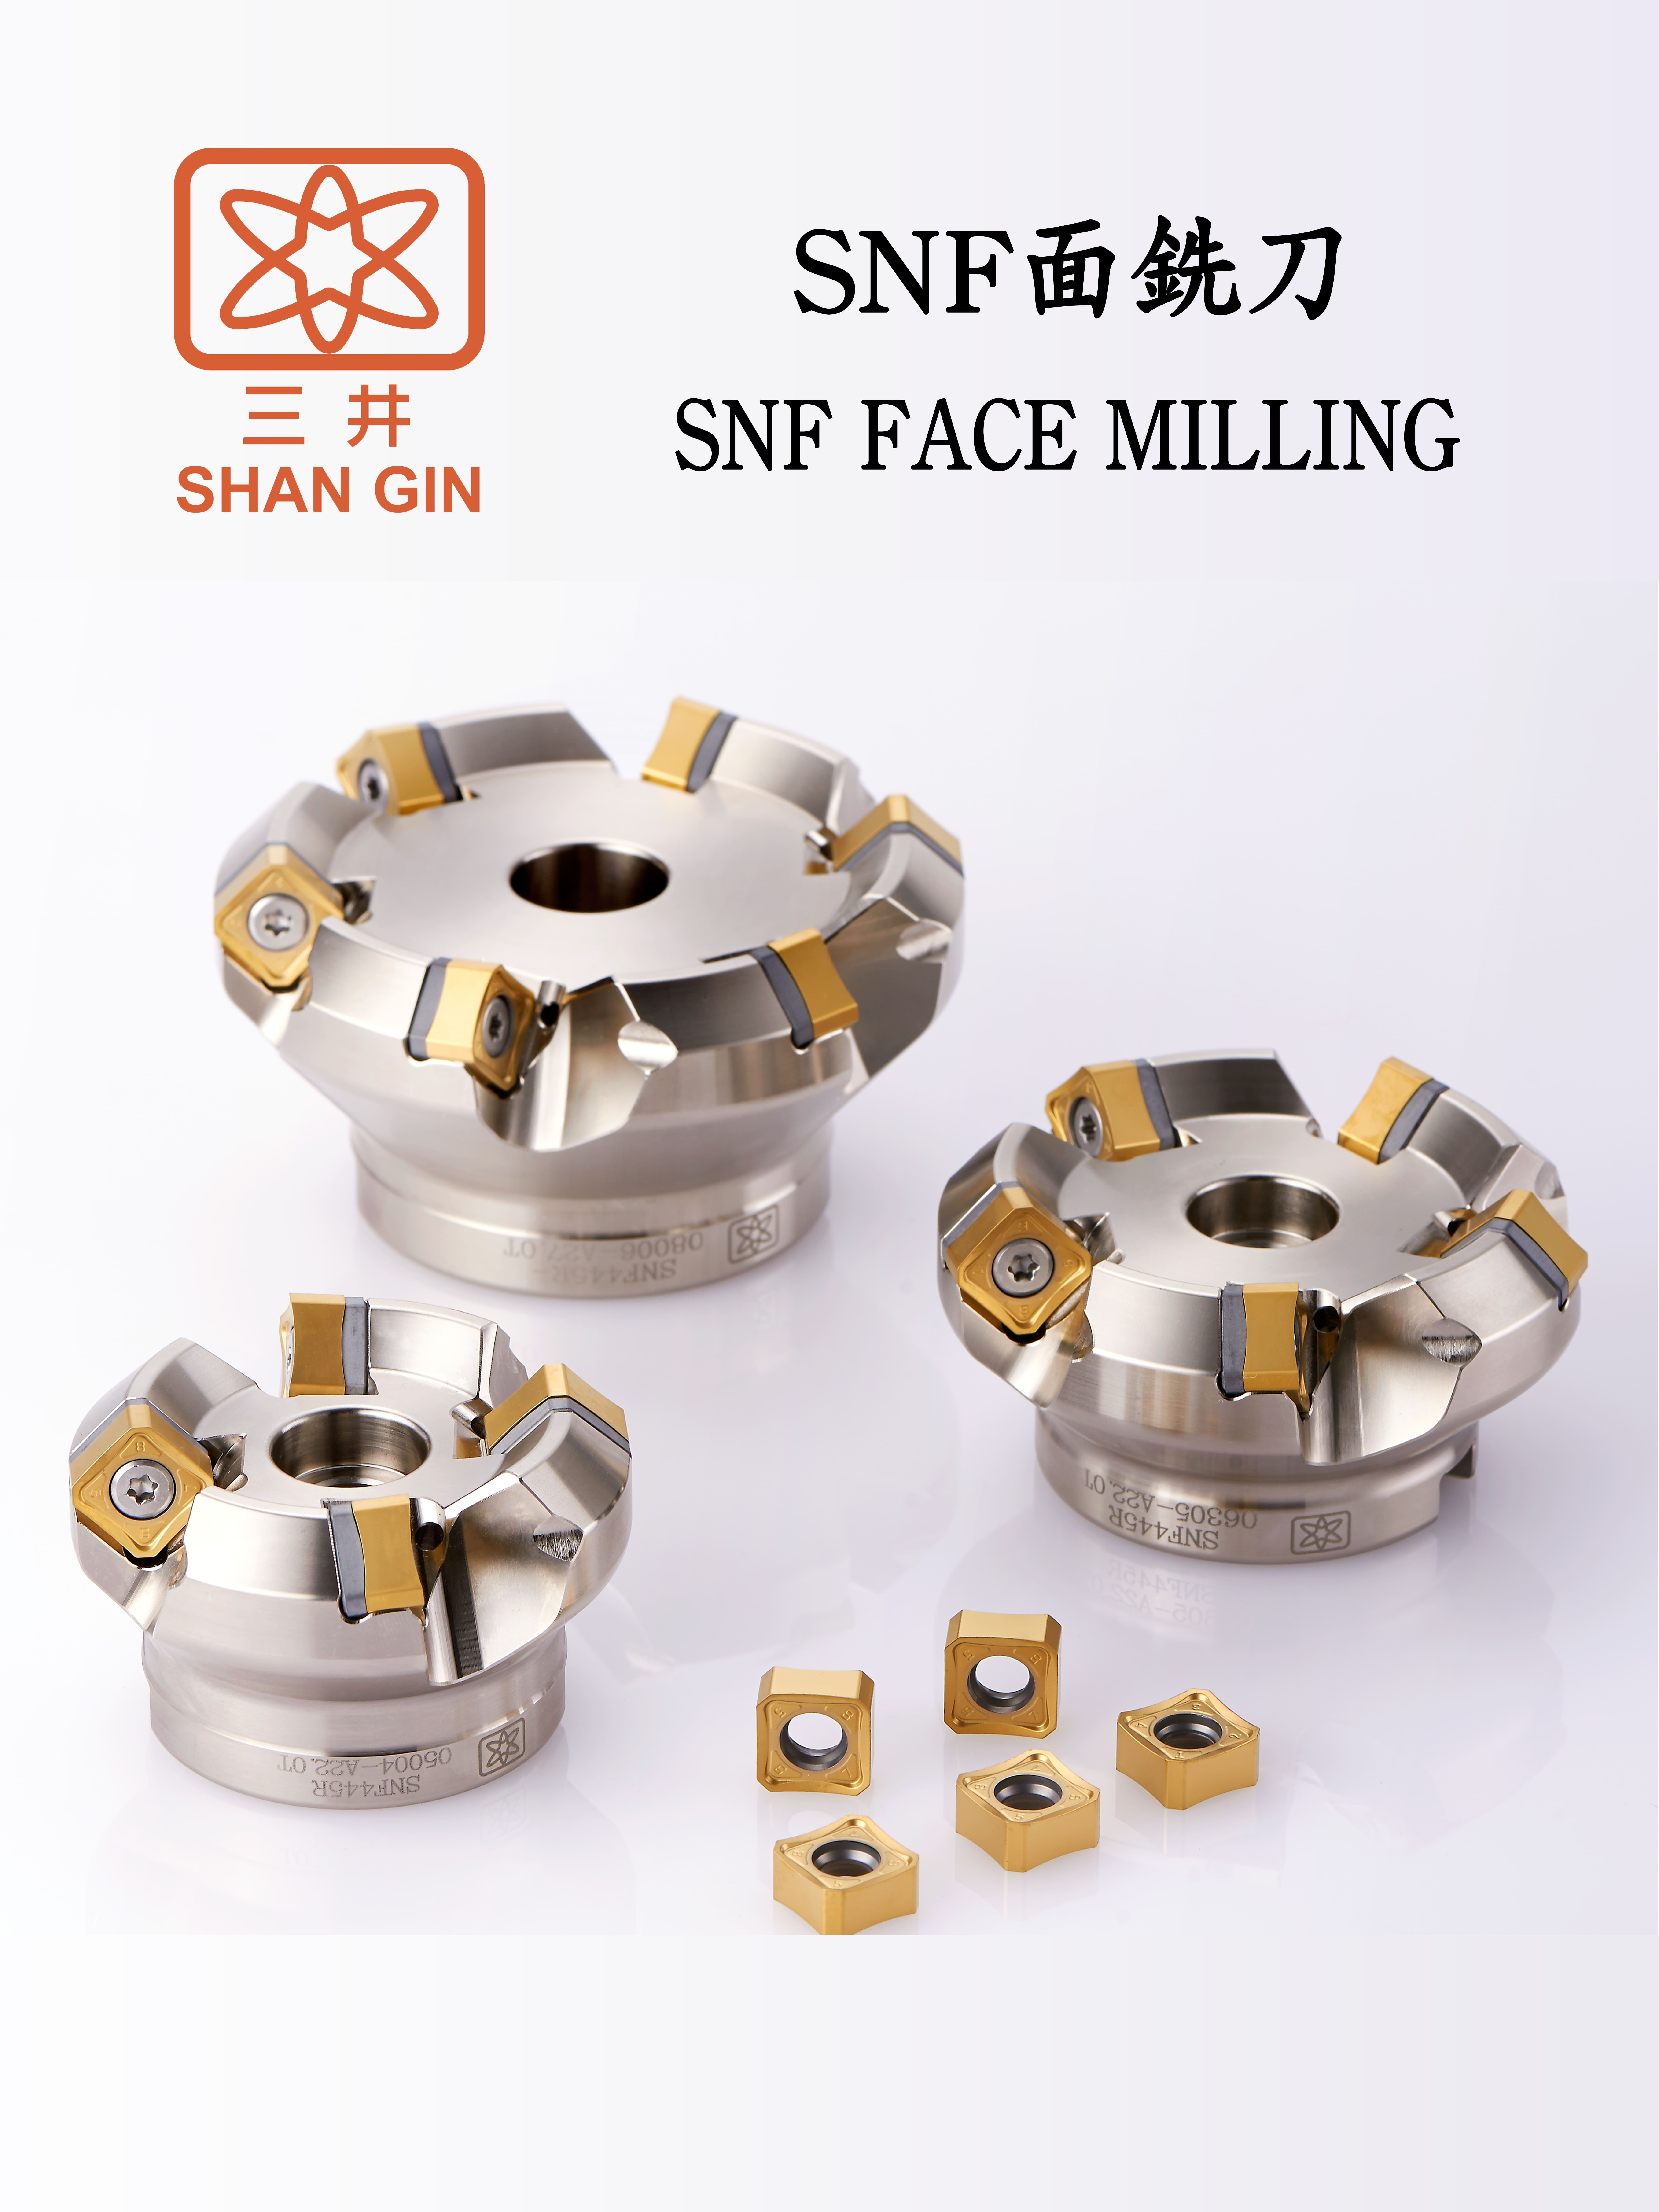 SNF FACE MILLING